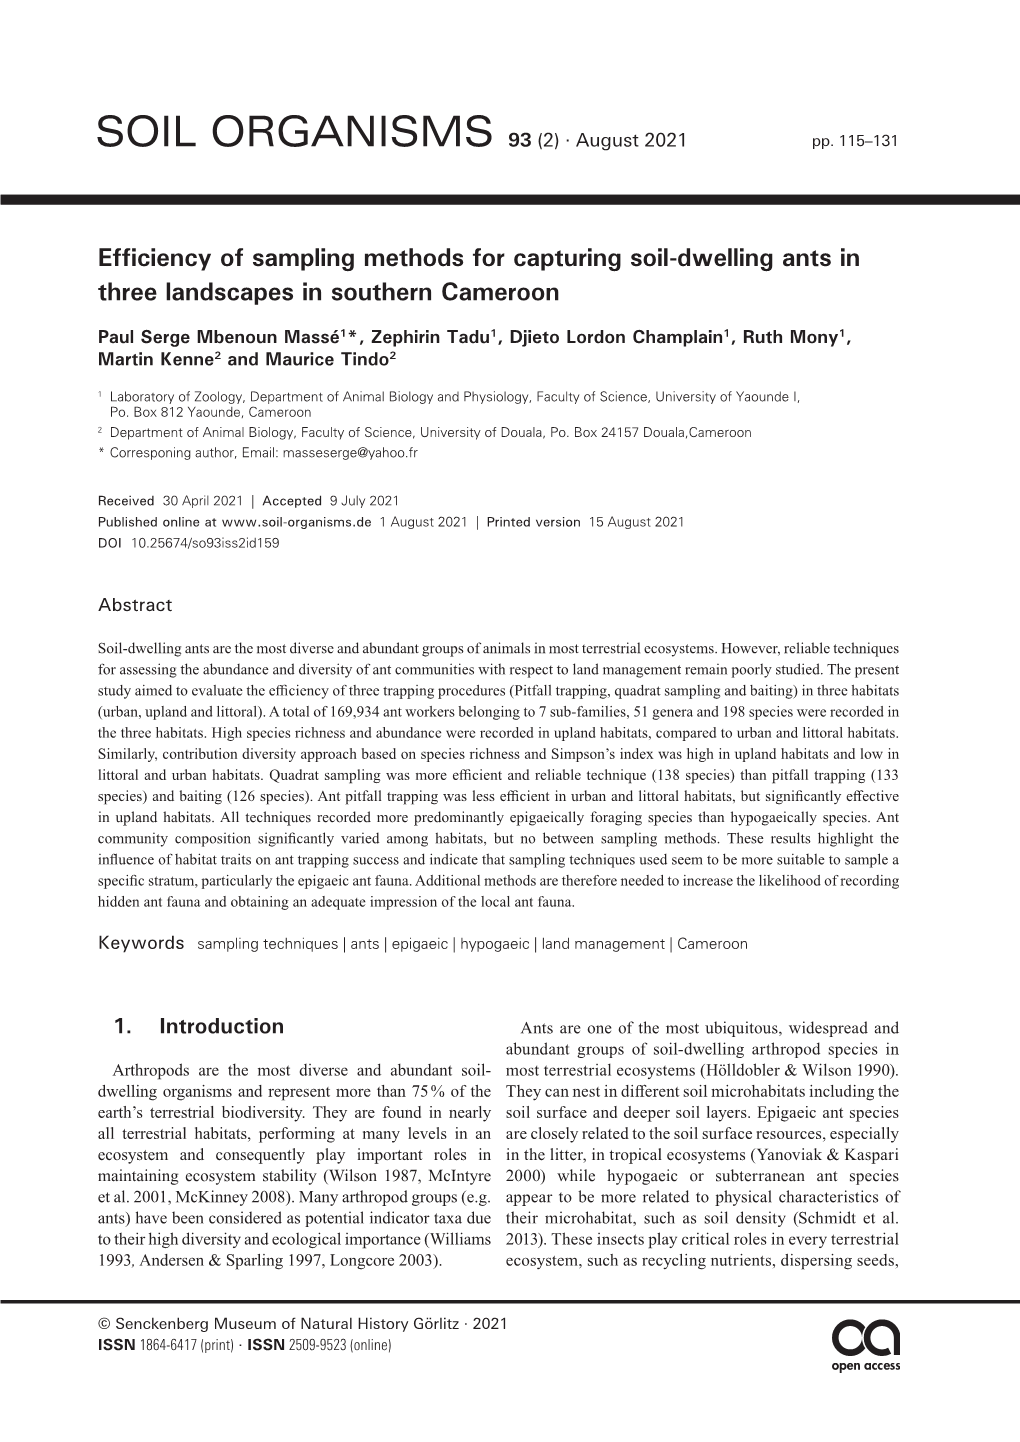 Efficiency of Sampling Methods for Capturing Soil-Dwelling Ants in Three Landscapes in Southern Cameroon